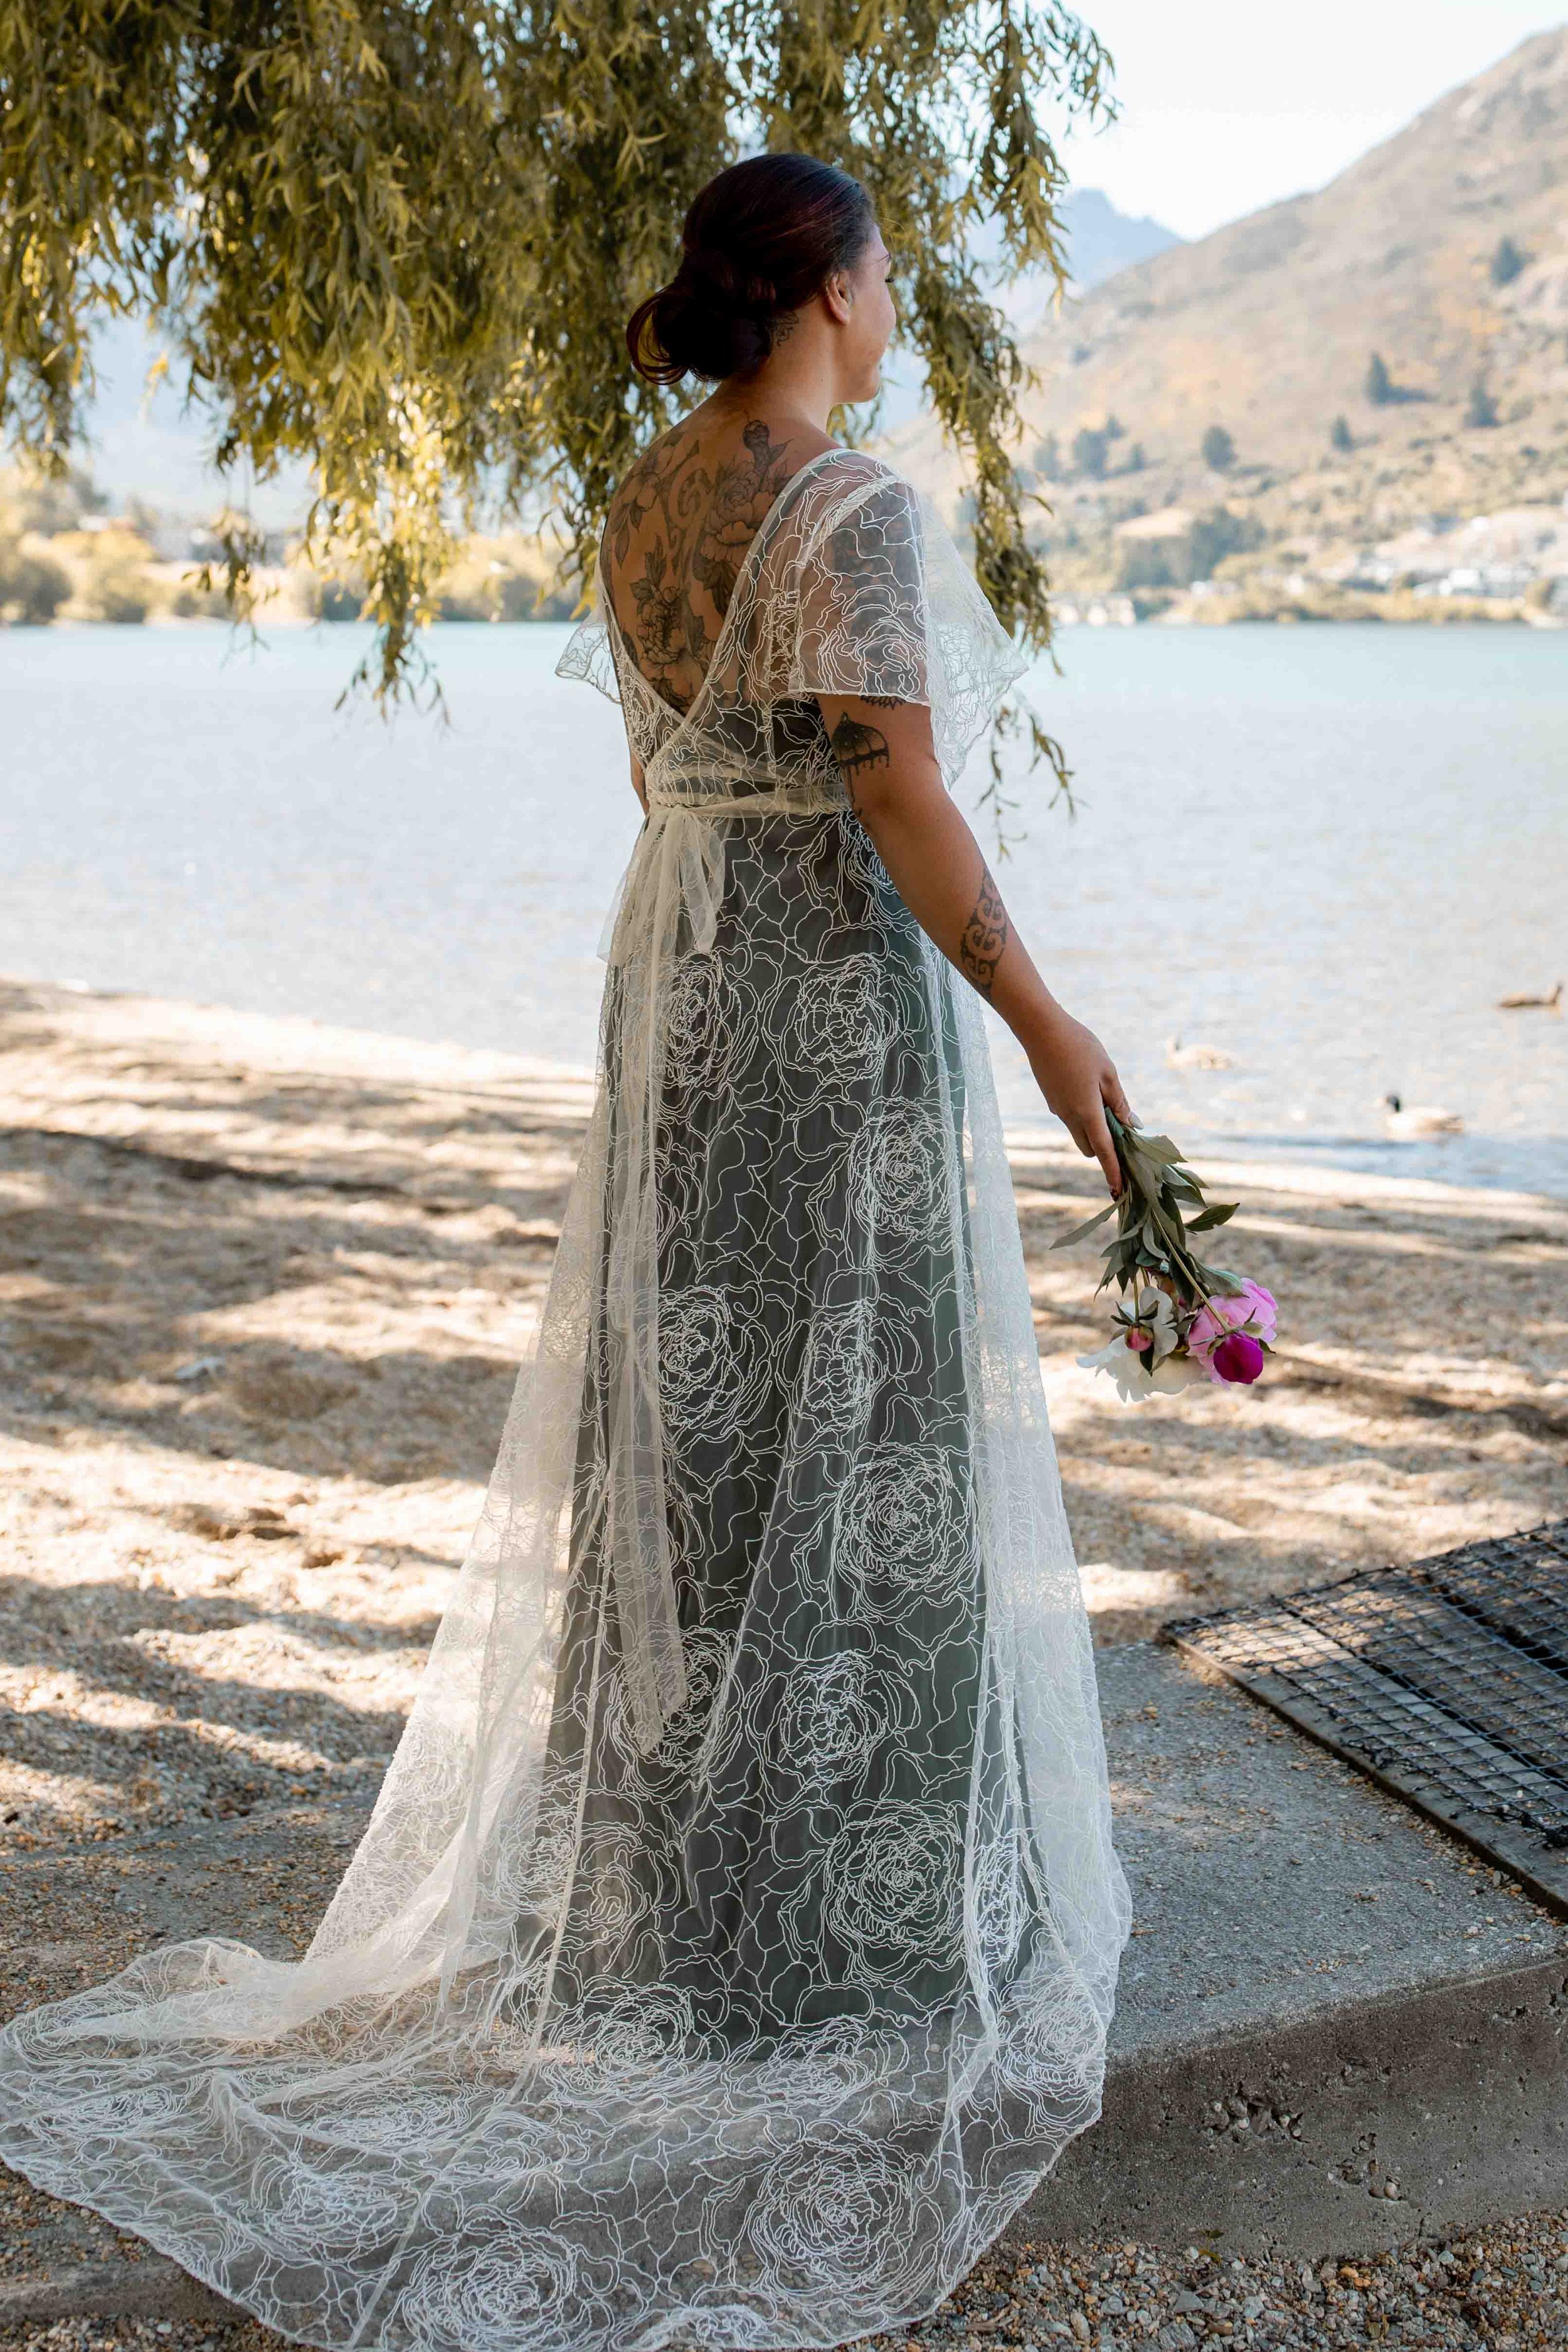 Sofia Wrap in Peony Lace +Harper Slip Dress in Olive - Nemo Bridal Couture Queenstown New Zealand 0V9A2401.jpg